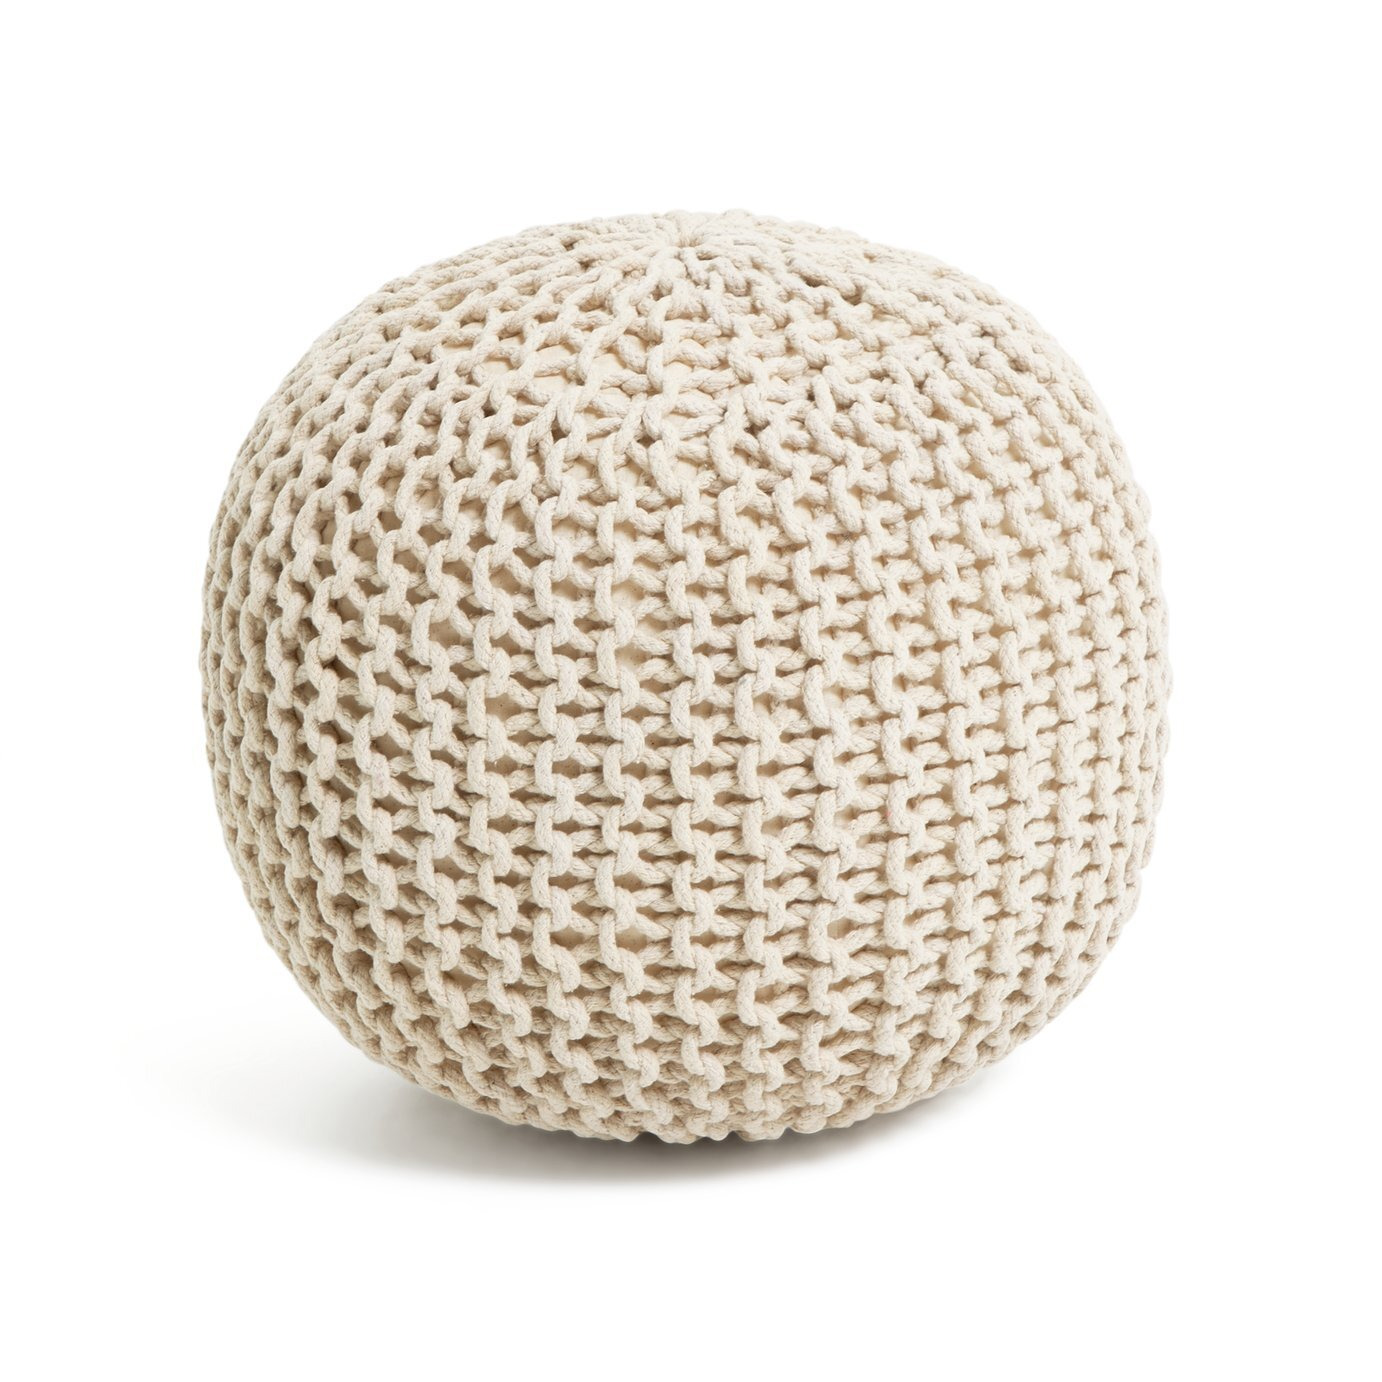 Kaikoo Dottie Cotton Knitted Pod Footstool - Natural - image 1